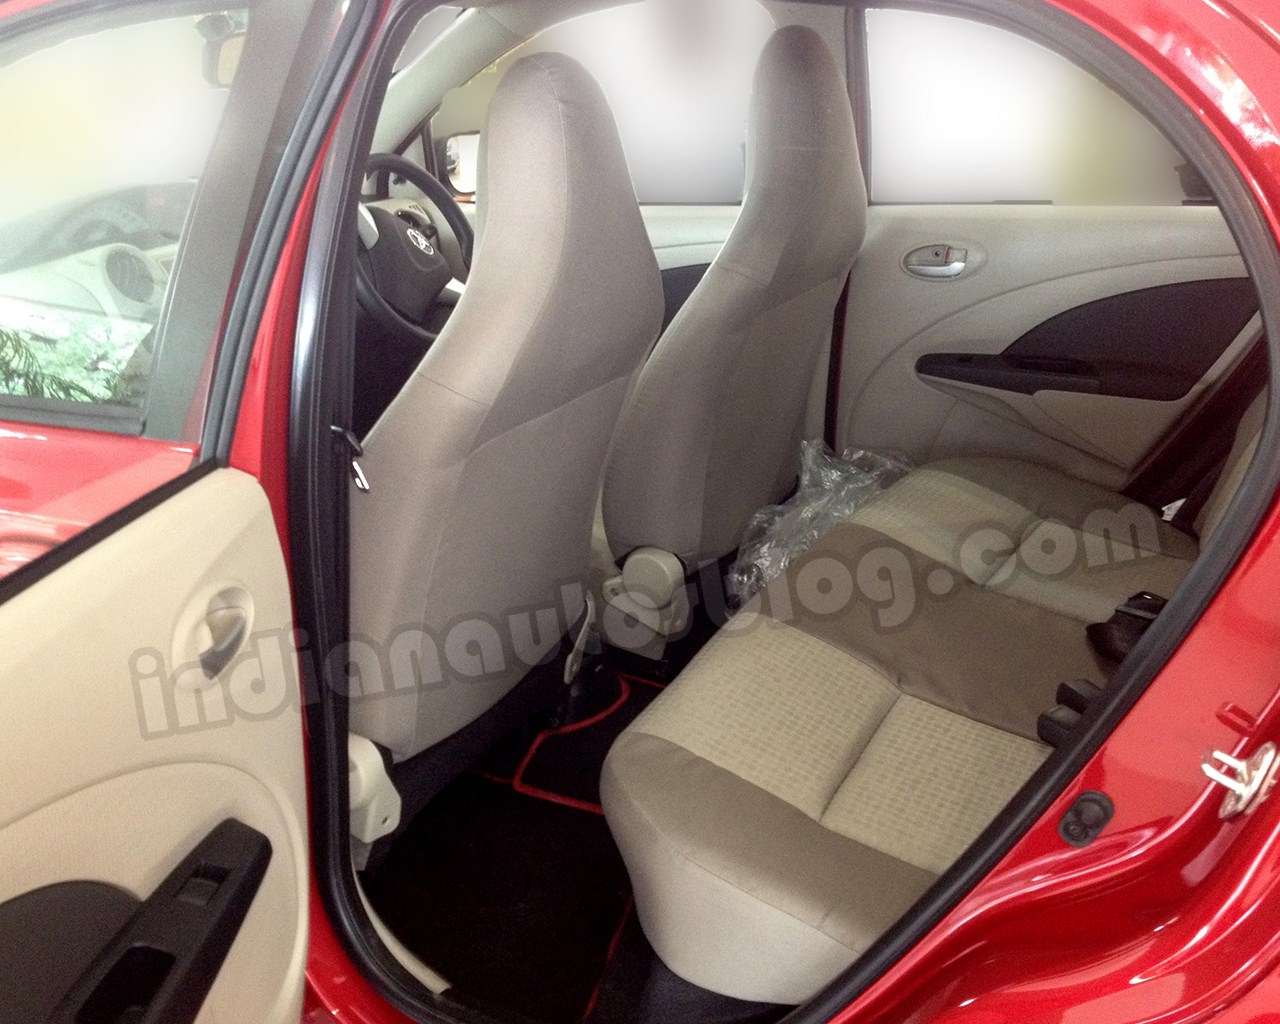 A Closer Look At The Beige Interior On The Toyota Etios Liva